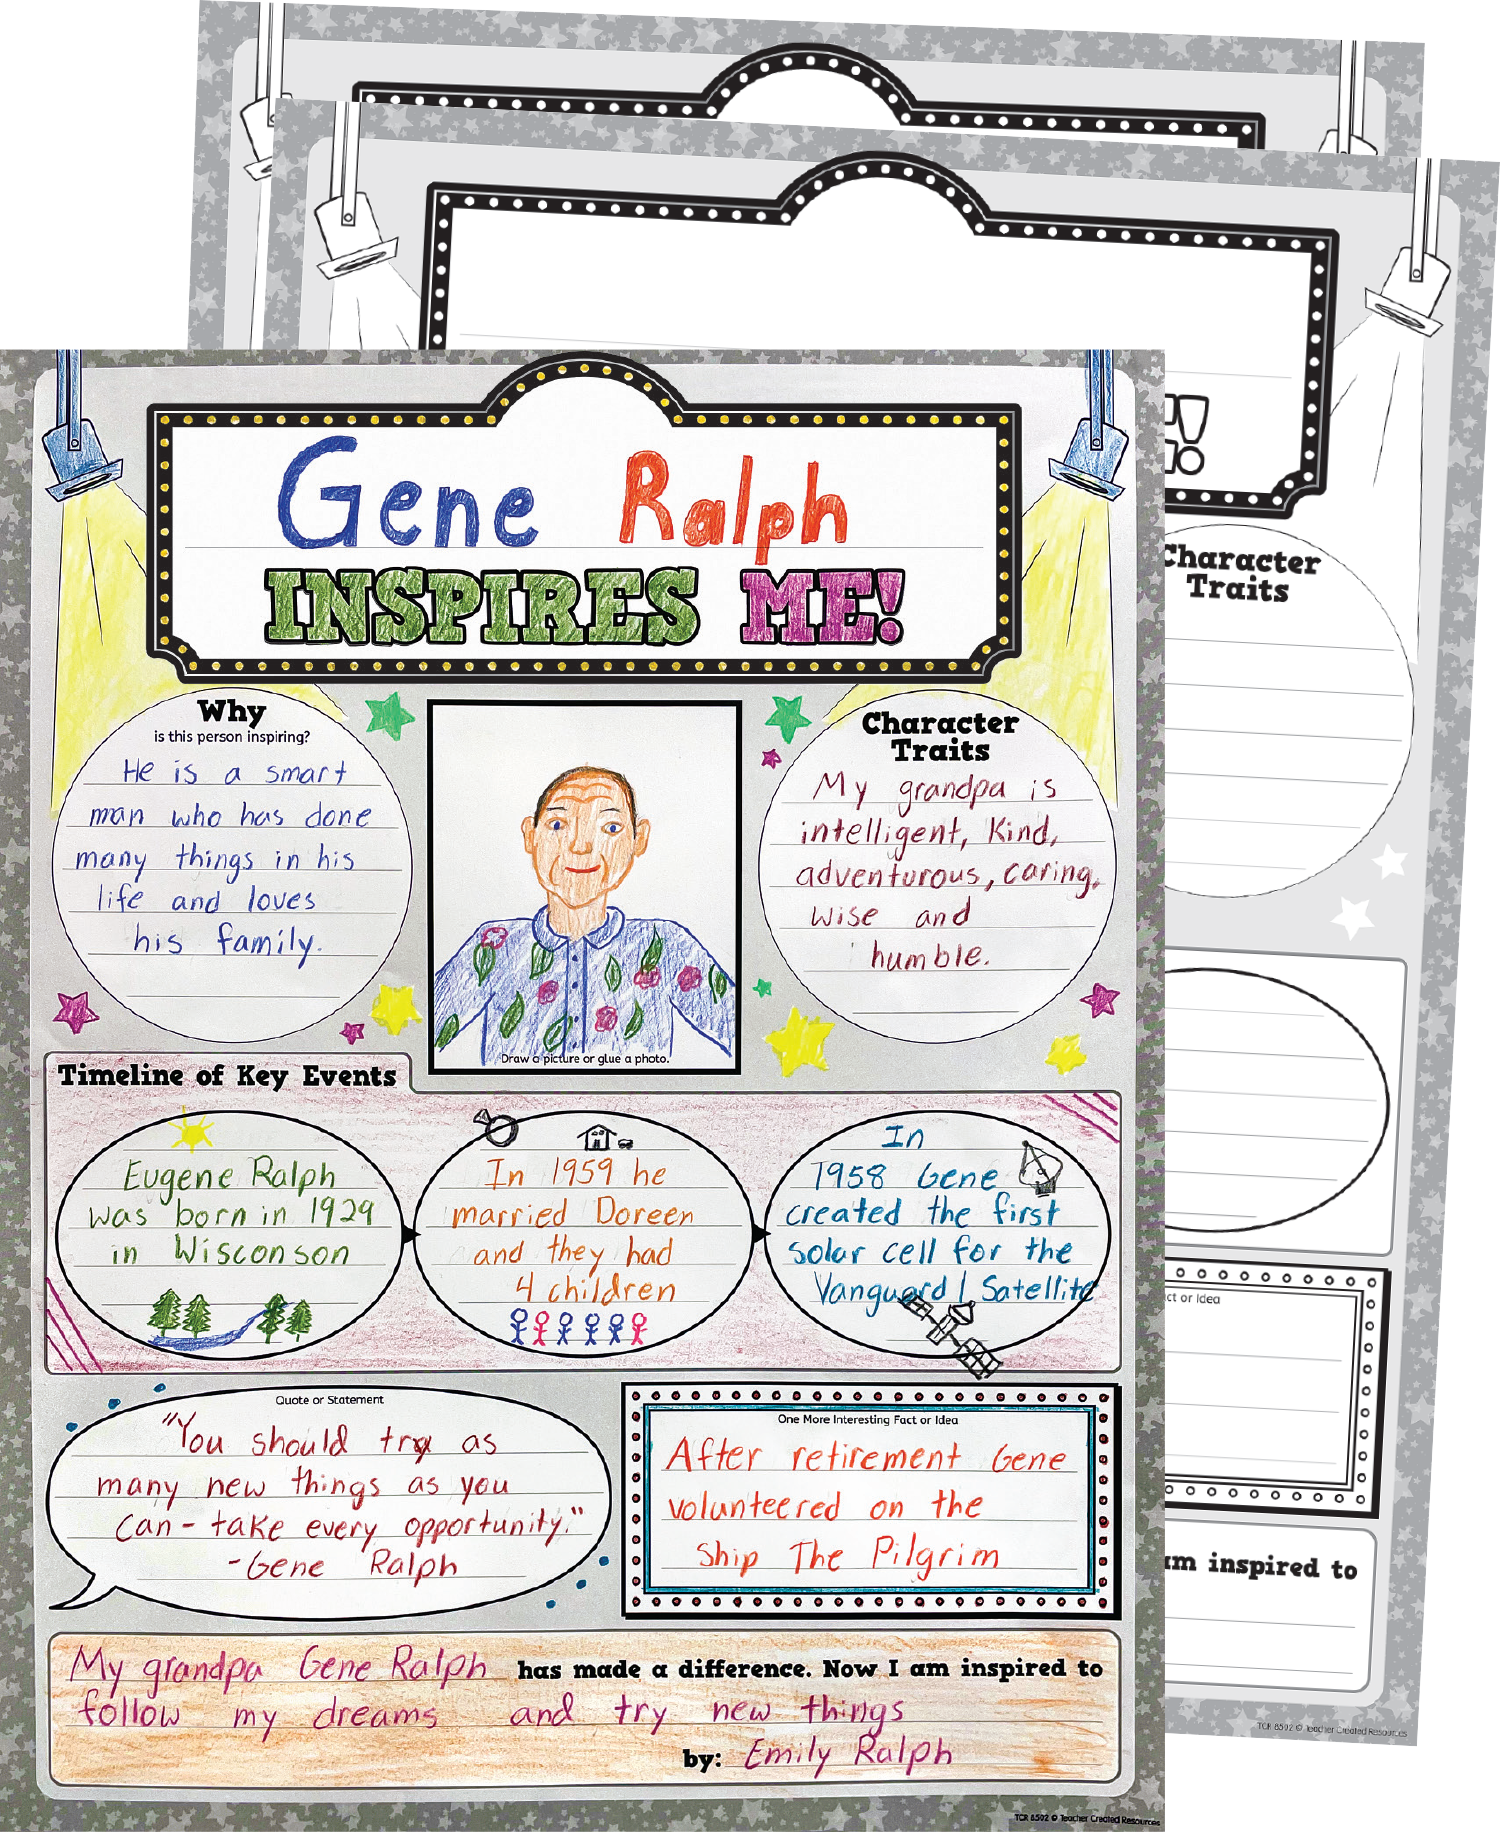 Here’s a fun way for students to do a report and display what they have learned for the whole class to see. Once they research specific information about their subject, they fill out their own poster to show what they’ve learned. The large 17" x 22" sheets provide plenty of space for words and pictures.